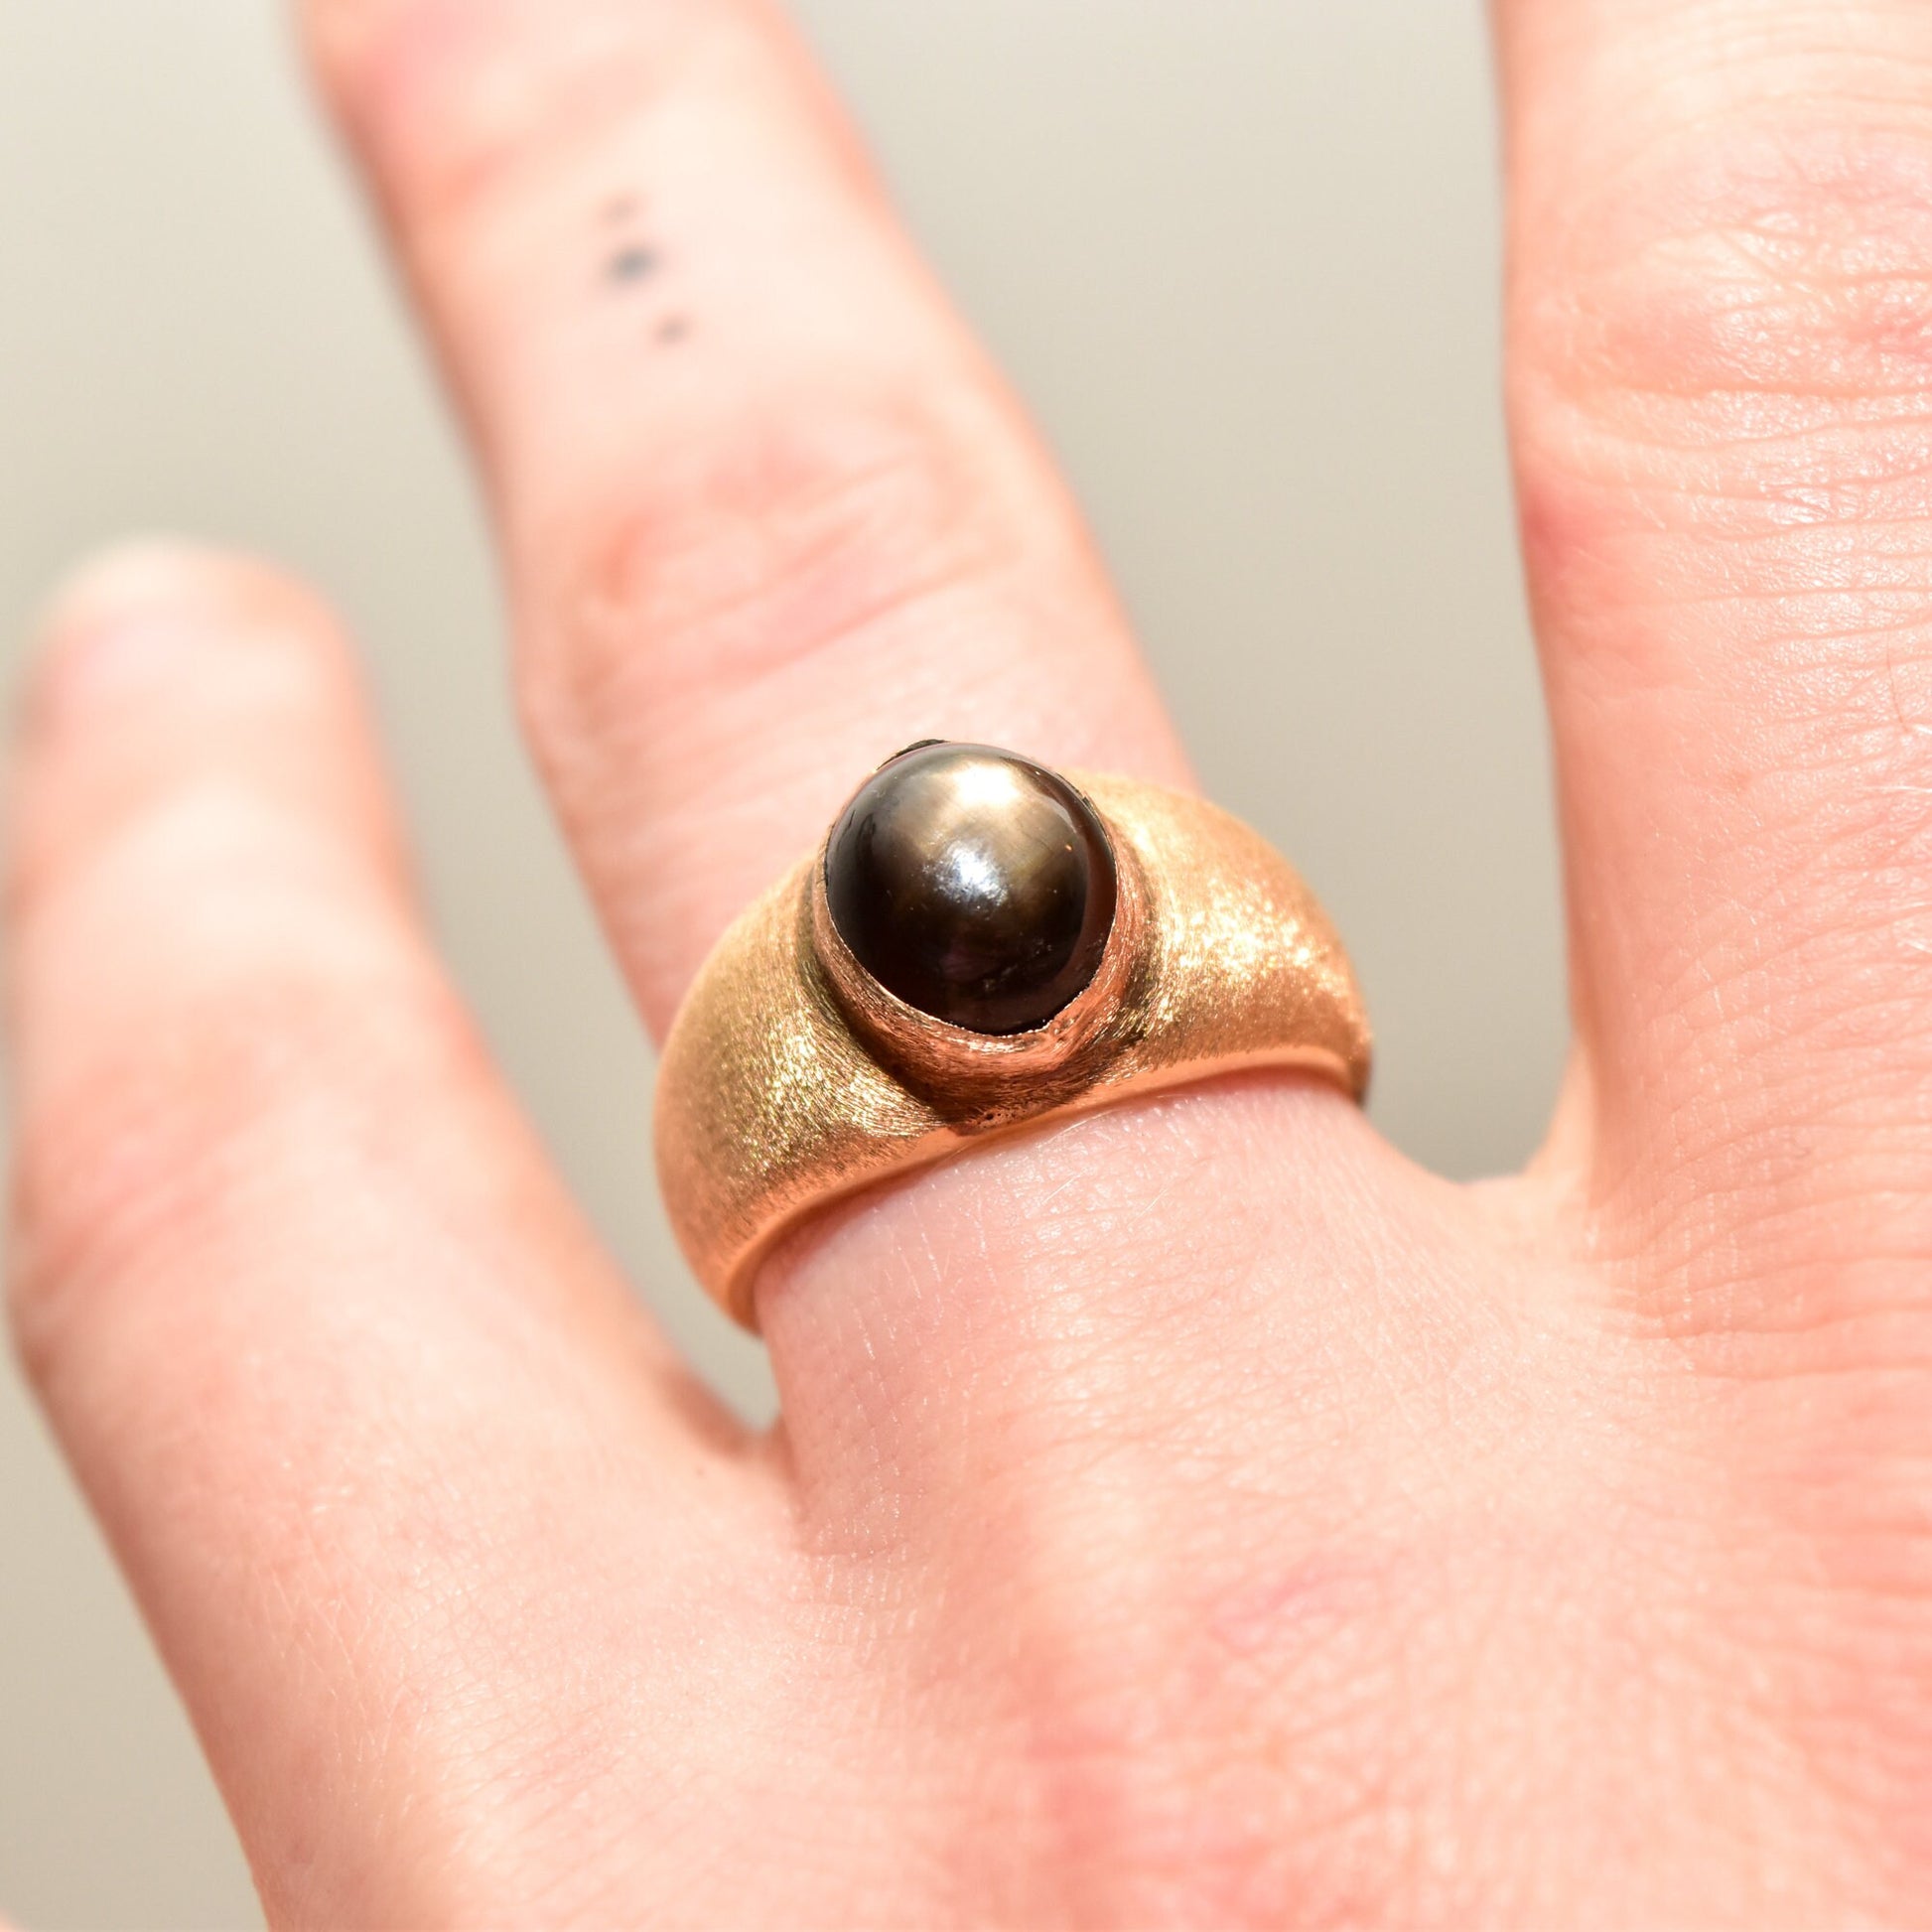 14K yellow gold men's pinky ring featuring a round black star sapphire cabochon with asterism, displayed on a hand, estate jewelry size 8 3/4 US.